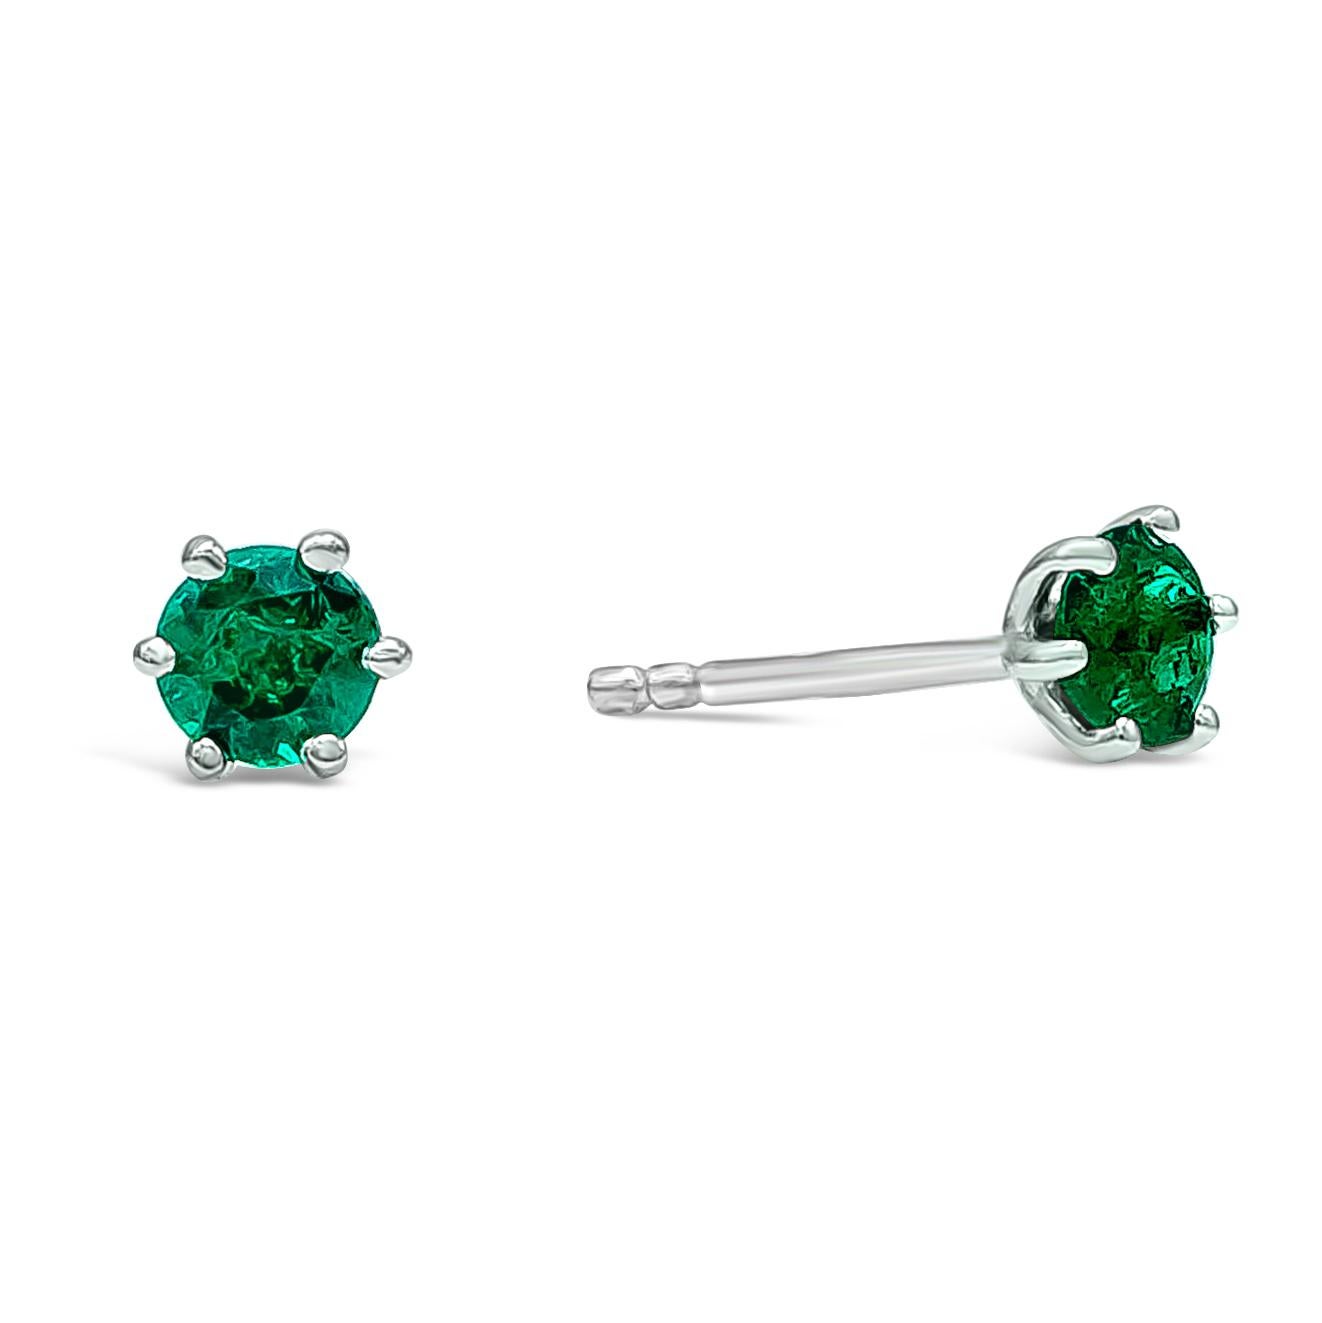 ﻿A timeless stud earrings design showcasing 0.40 carat total round green emeralds, Set in a classic six-prong setting. Made with 18K White Gold.

Style available in different price ranges. Prices are based on your selection. Please contact us for